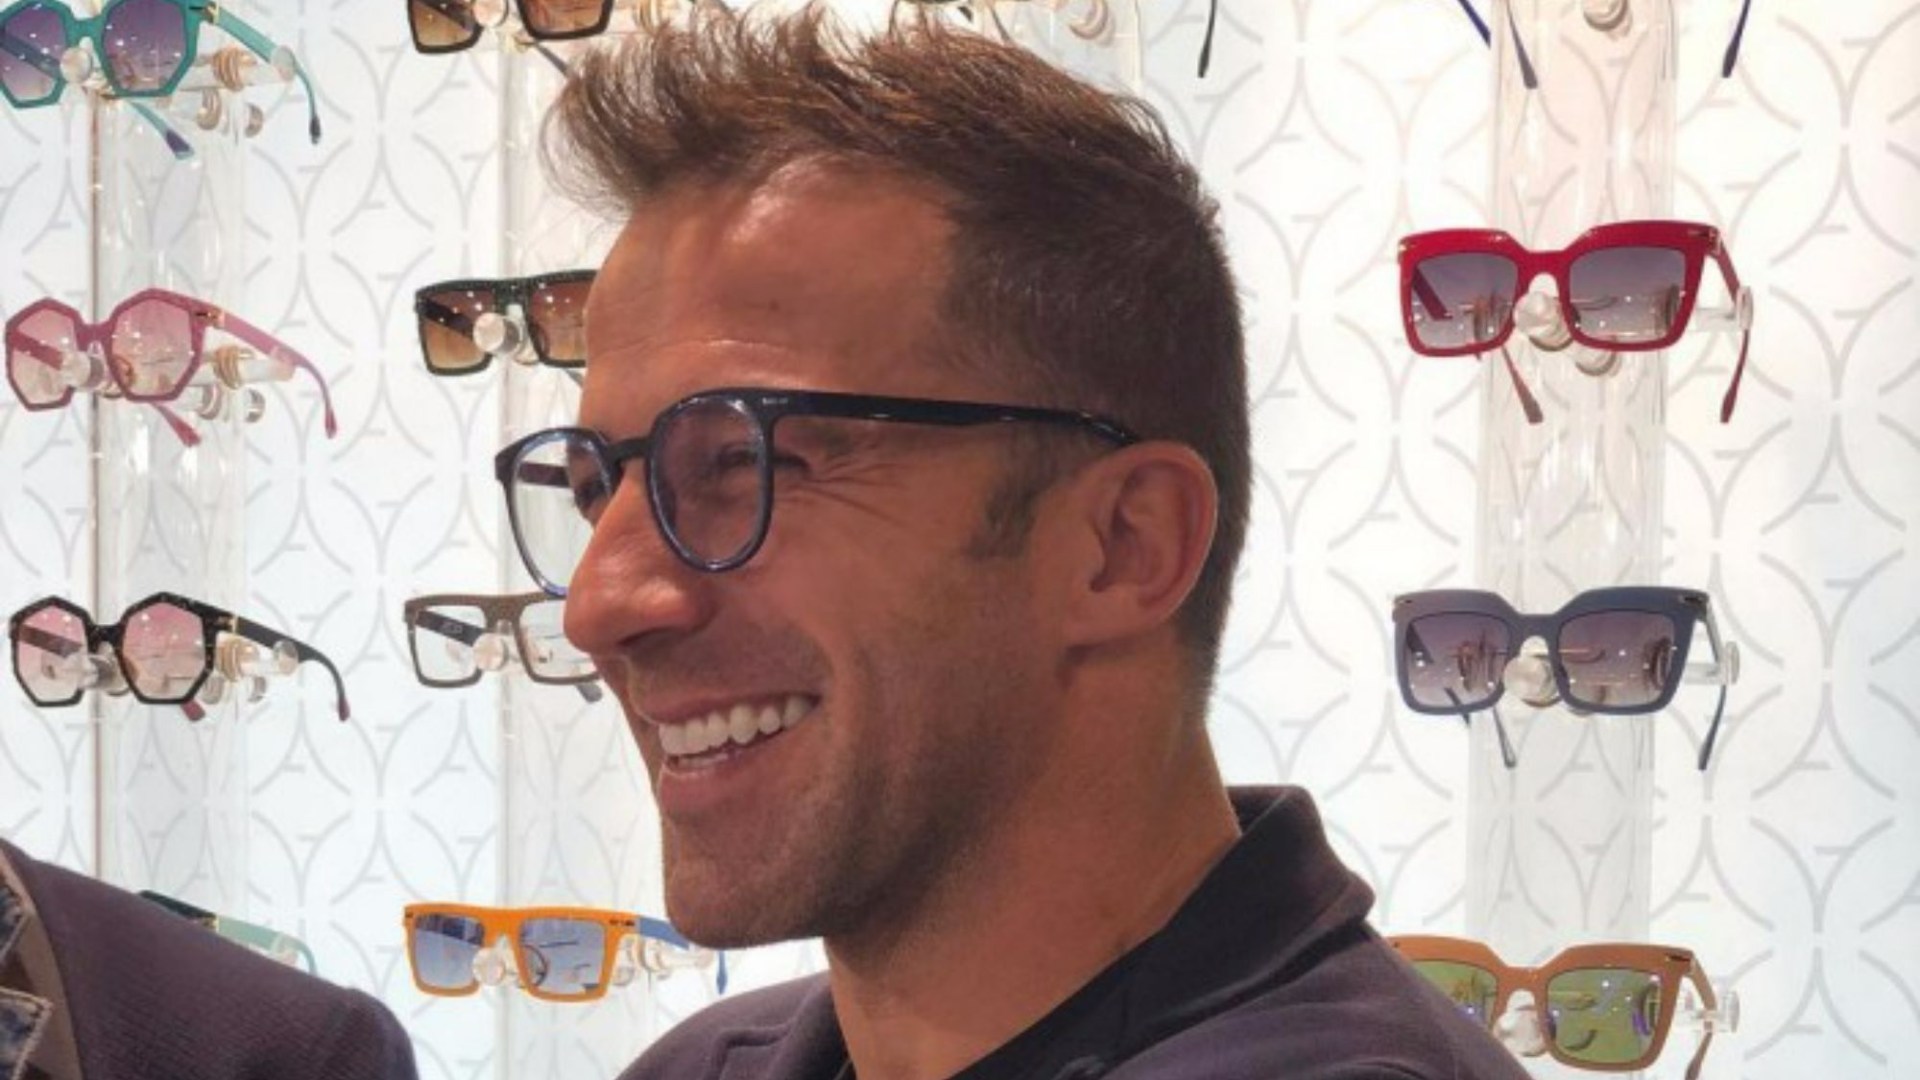 Juventus and Italy legend now has own glasses brand after being inspired by David Beckham’s style [Video]